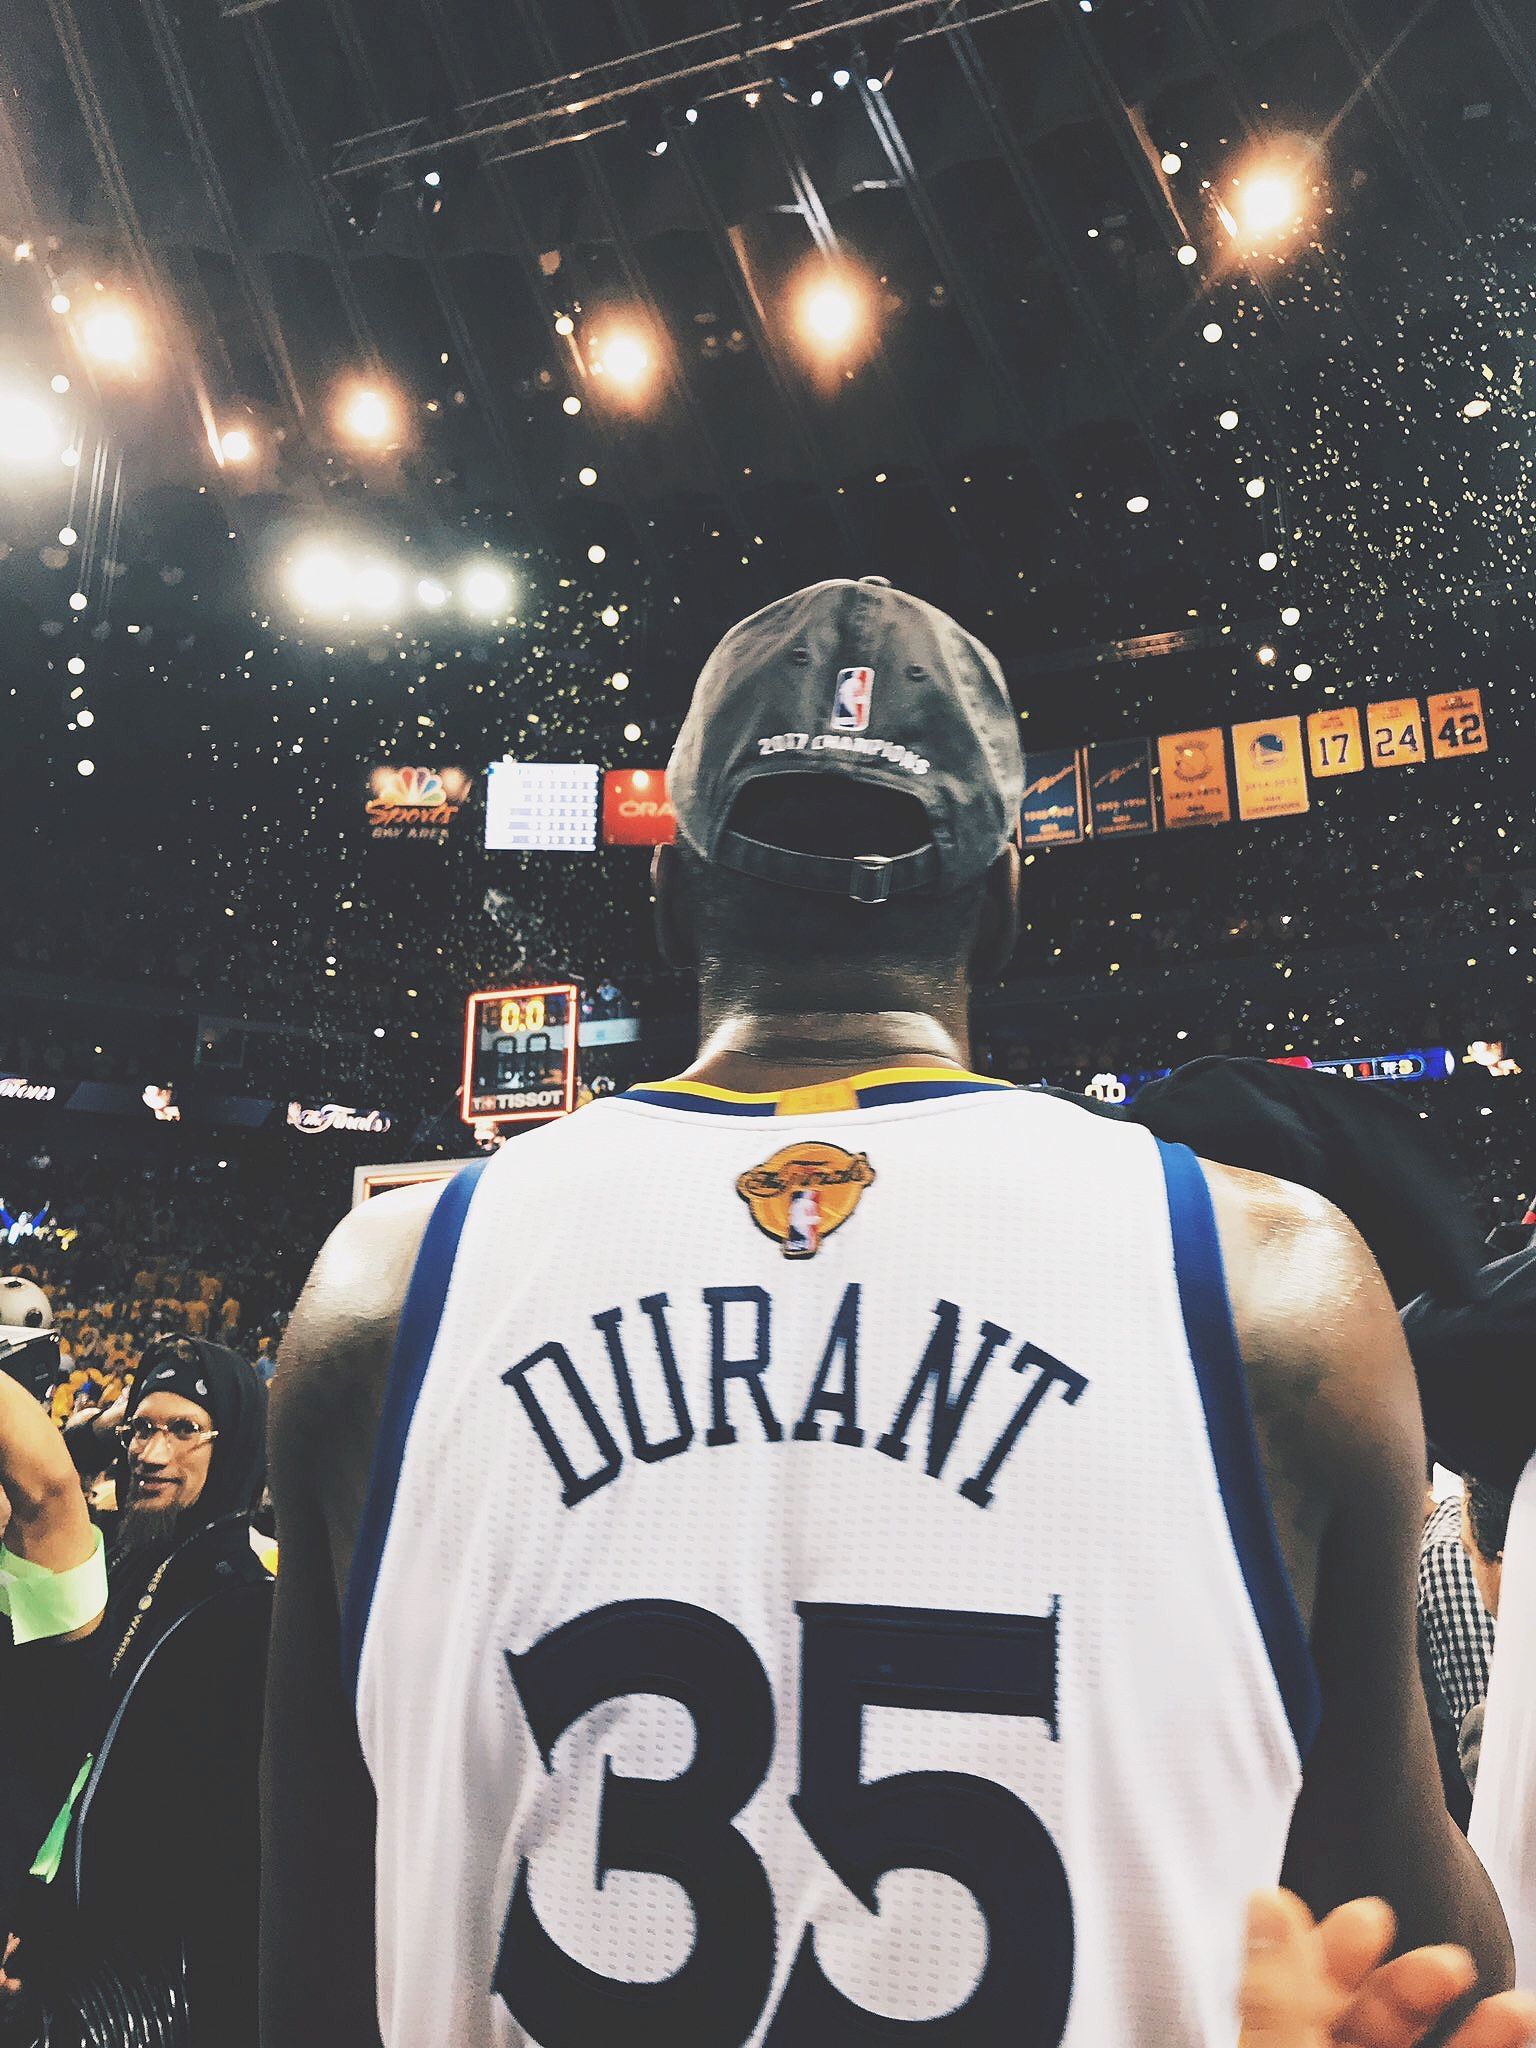 Kd Wallpapers